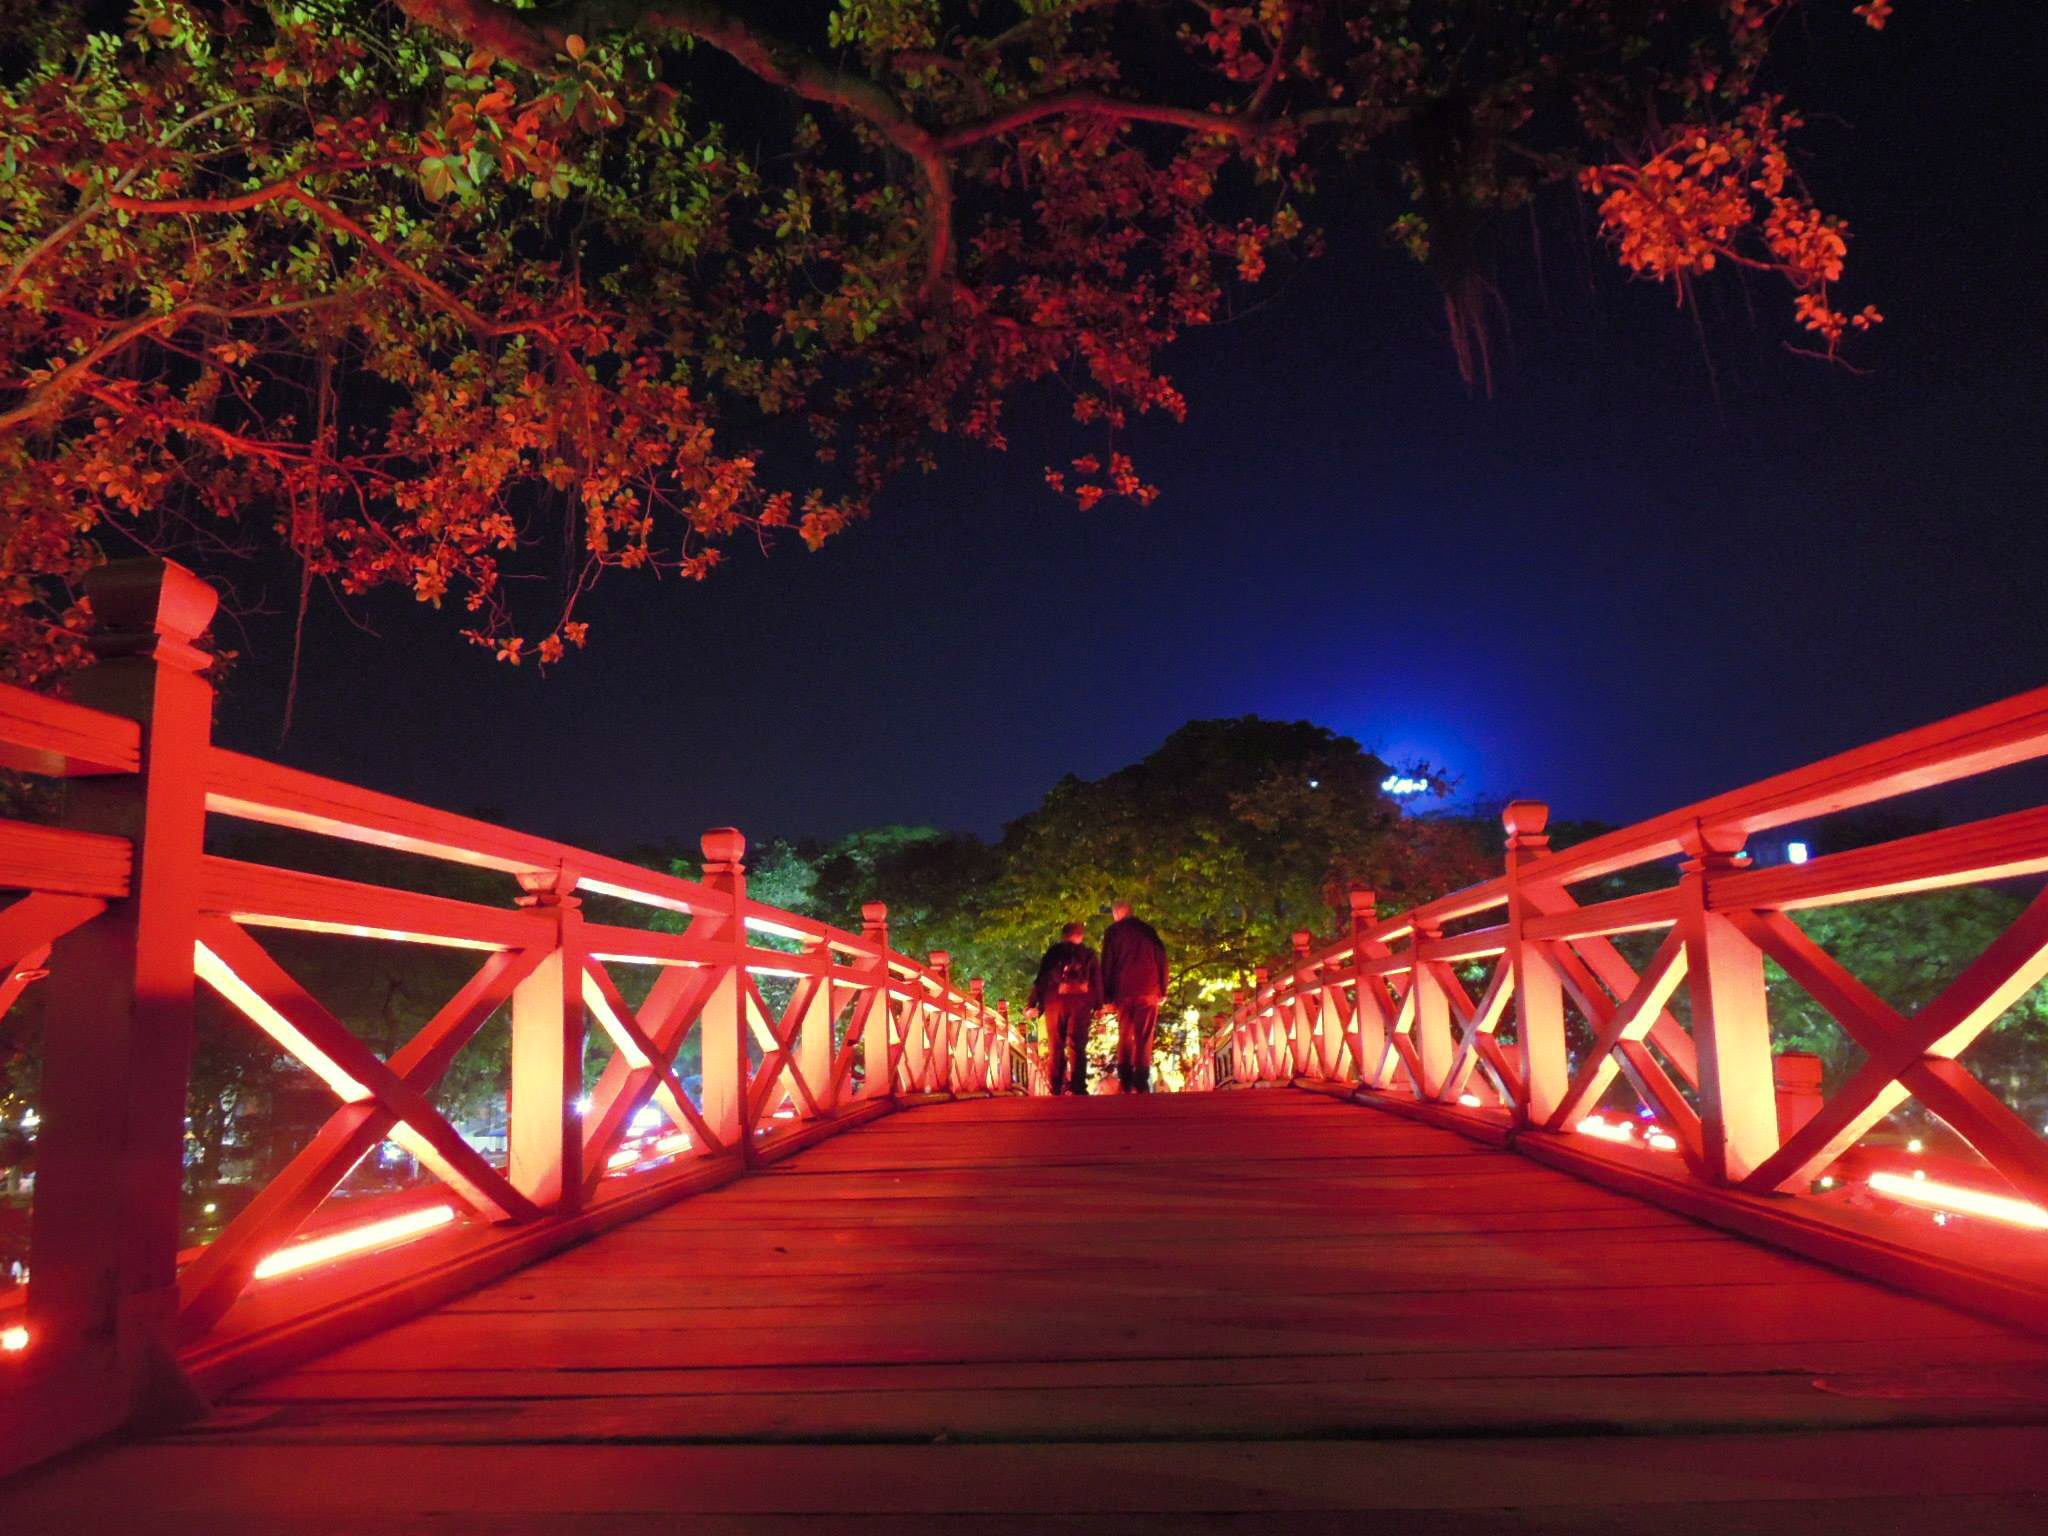 AN EVENING AT THE LAKE. Hoan Kiem Lake’s red Huc bridge looks beautiful and romantic when lit up at night. Photo by Ros Flores  